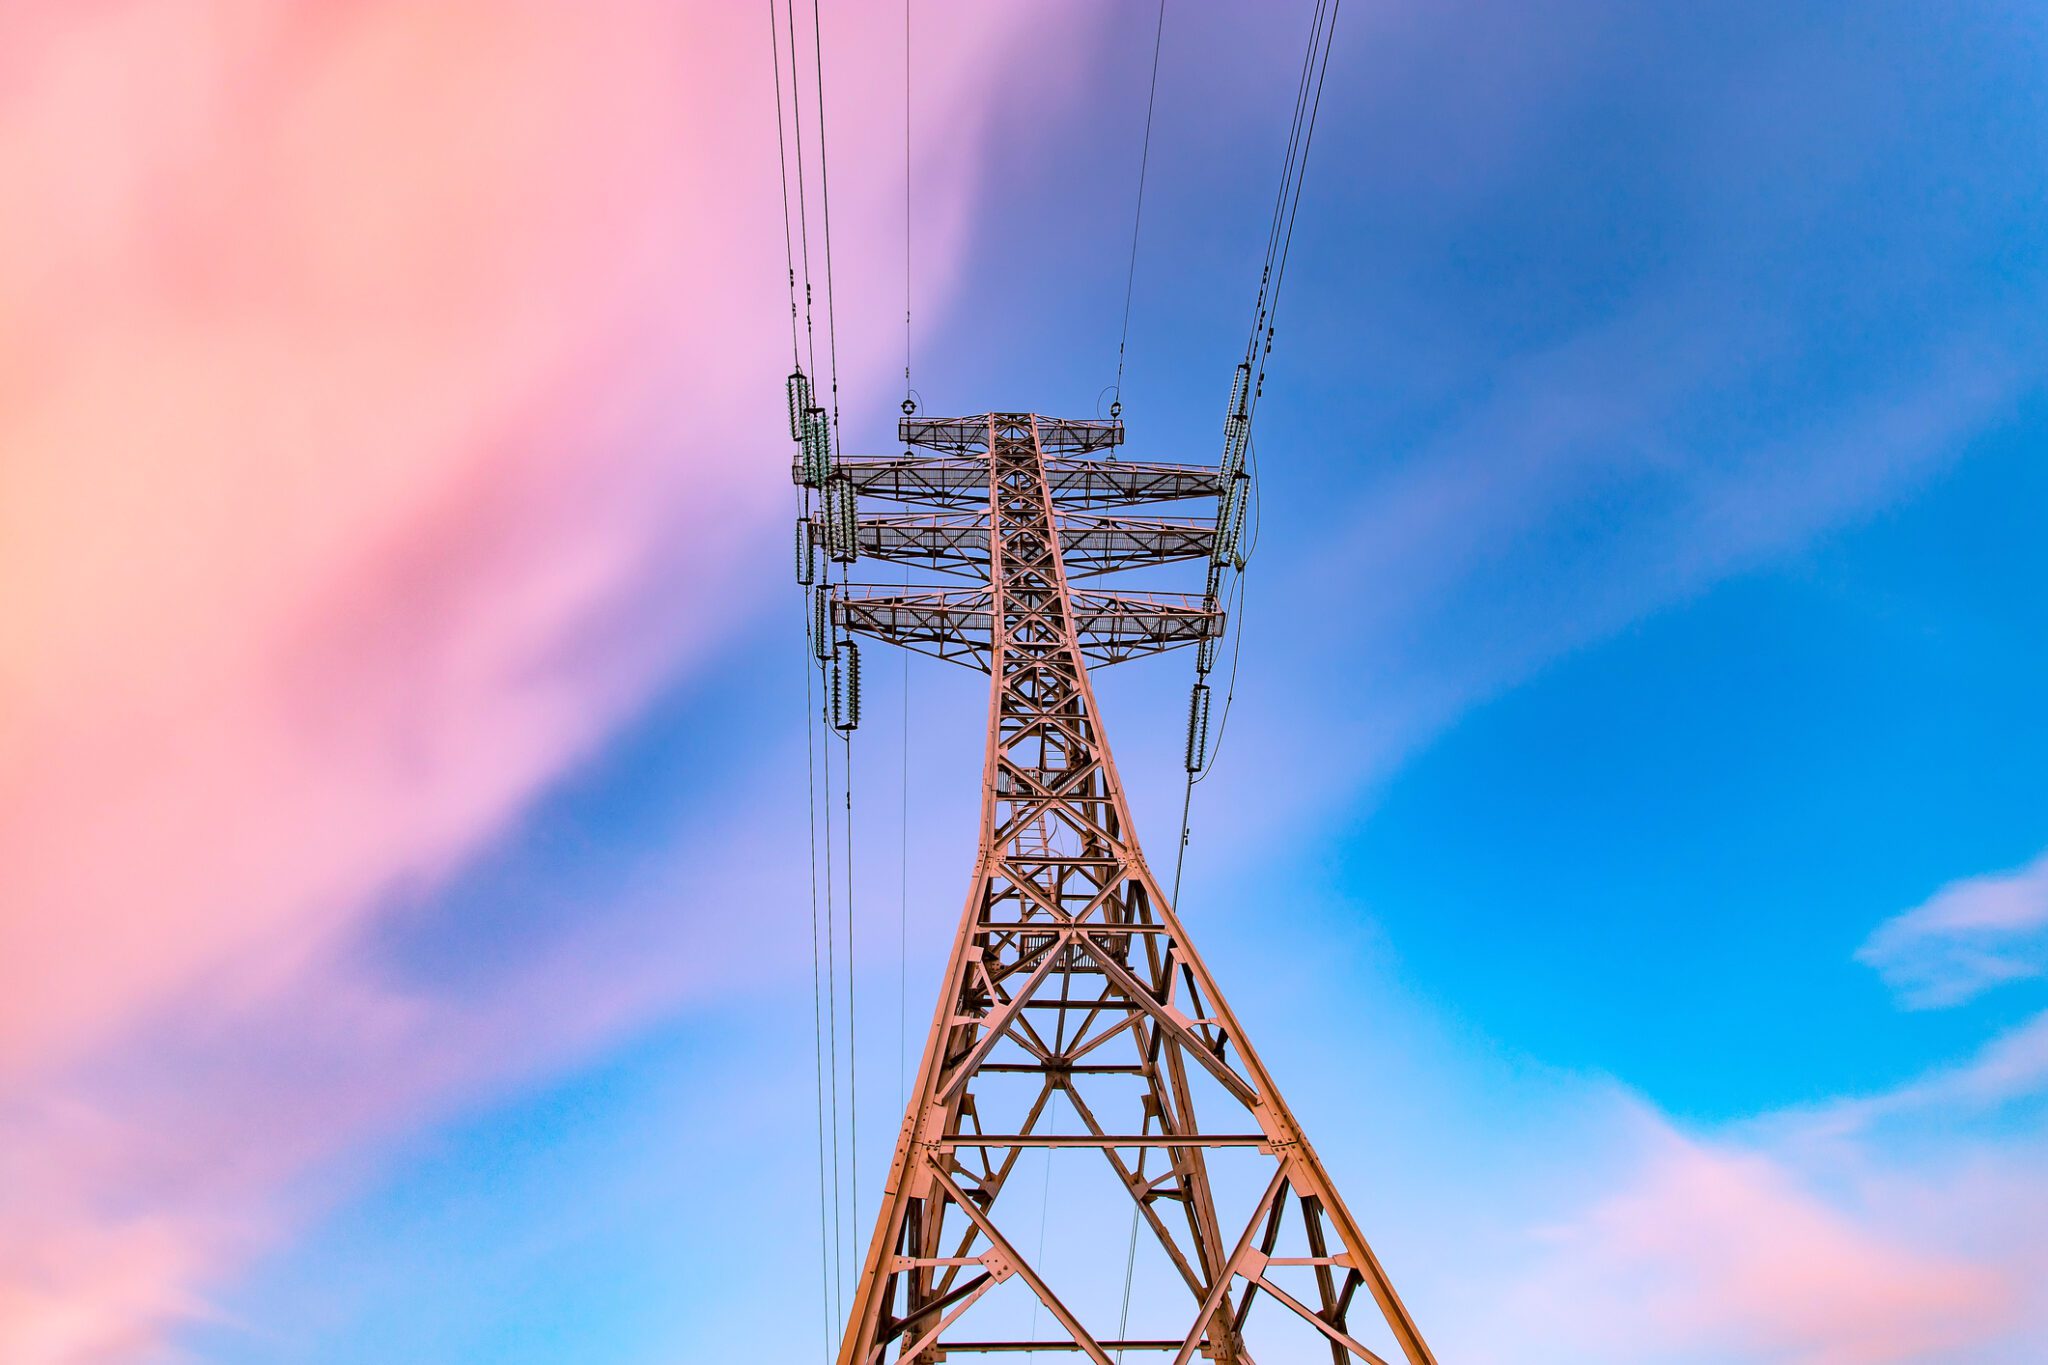 High voltage electricity pylons and transmission power lines on the blue sky background at sunset